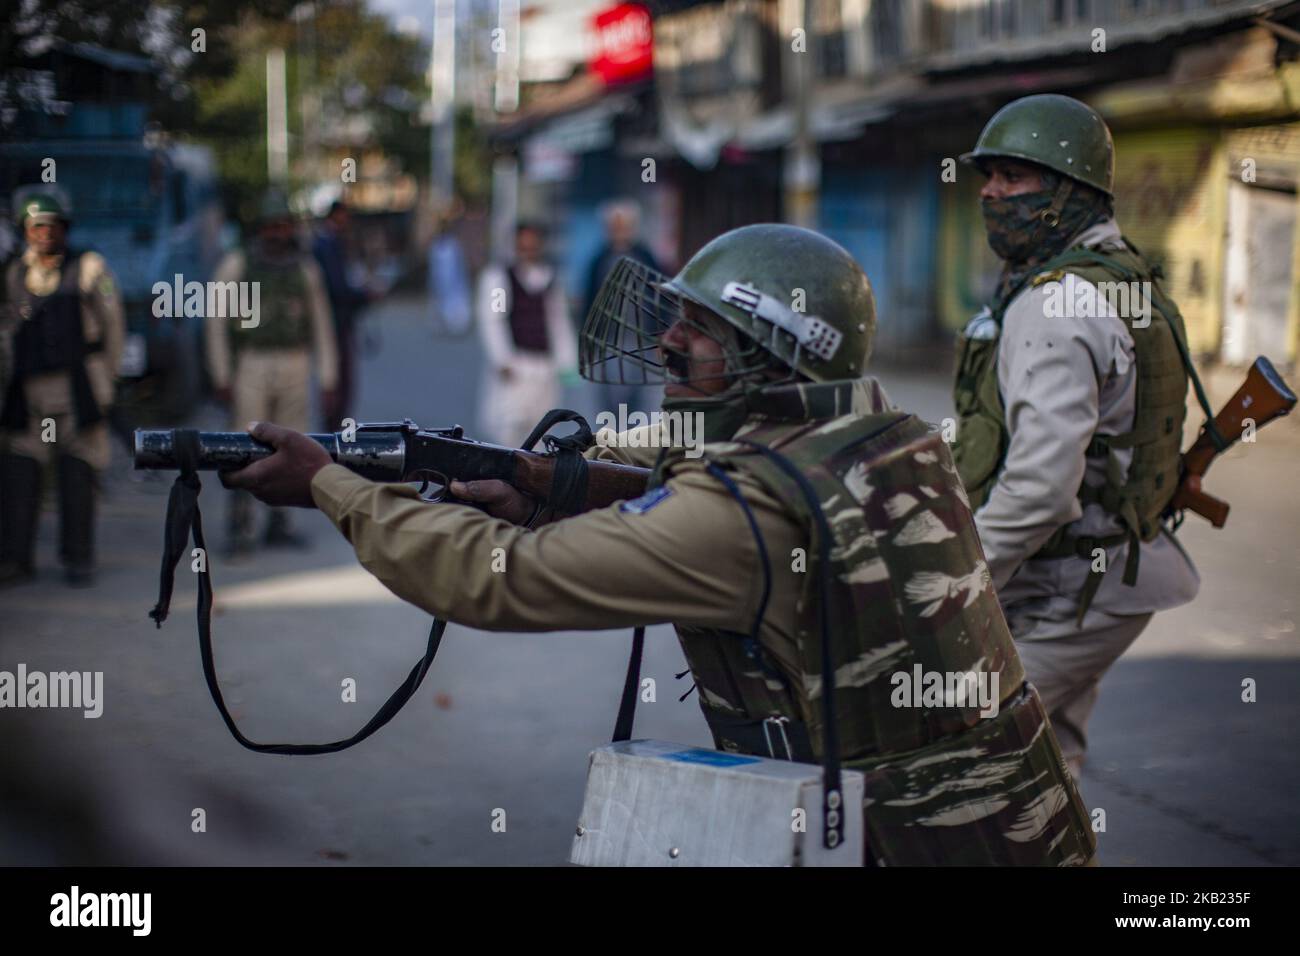 An Indian paramilitary trooper aims his gun towards Kashmiri protesters during a protest against the killing of a Kashmiri rebel commander on October 12, 2018 in Srinagar, the summer capital of Indian administered Kashmir, India.Kashmiri youth clashed with Indian government forces who were deployed in strength in different parts of Srinagar on Friday to prevent protests against the killing of a Kashmiri rebel commander in Kupwara district of Indian-administered Kashmir the previous day. Manan Wani, who had quit his doctorate in Geology at an Indian university to join the Hizb-ul-Mujahideen mil Stock Photo